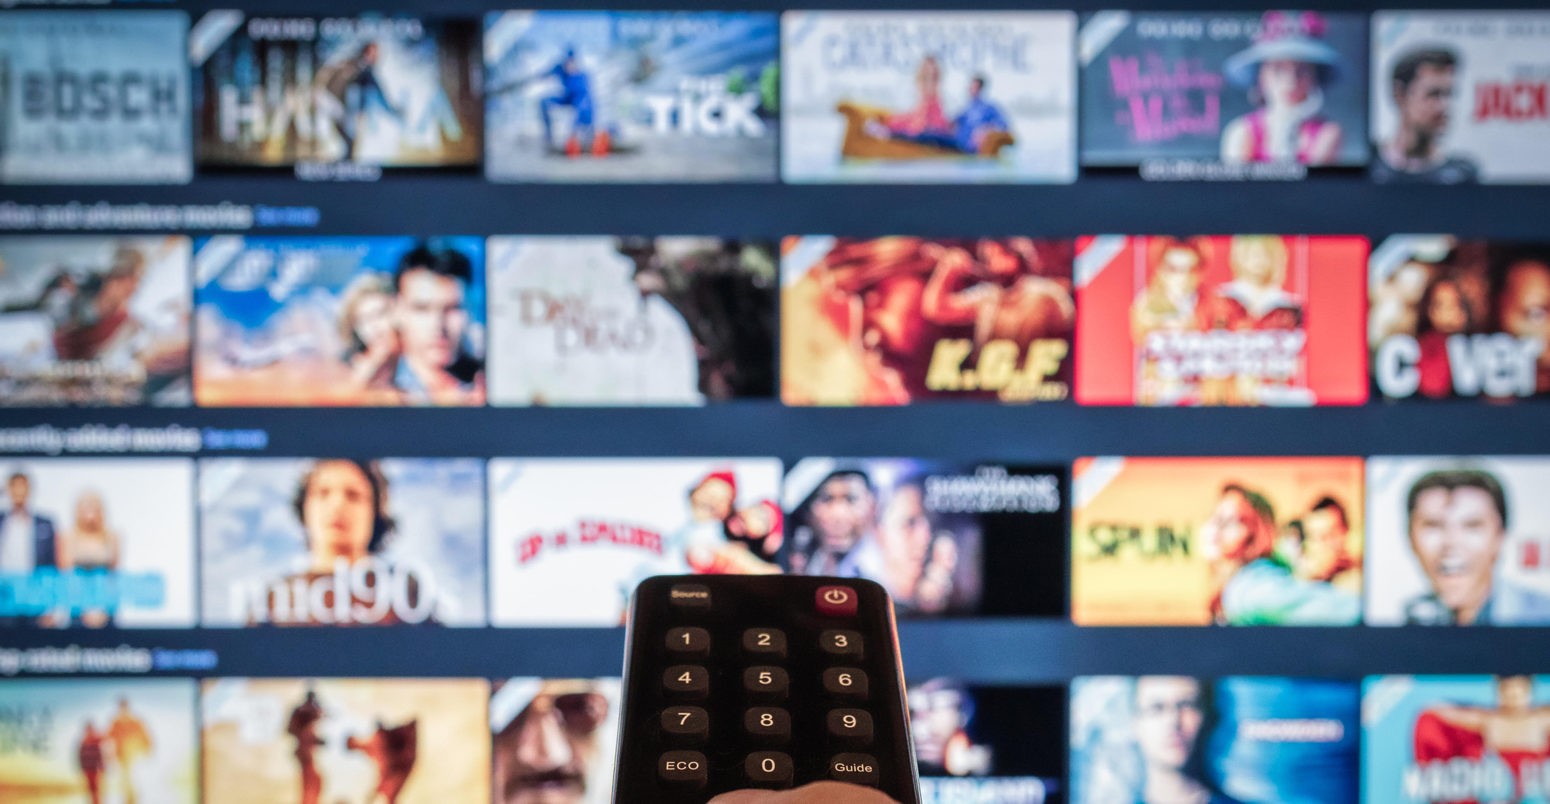 Factcheck: What is the carbon footprint of streaming video on